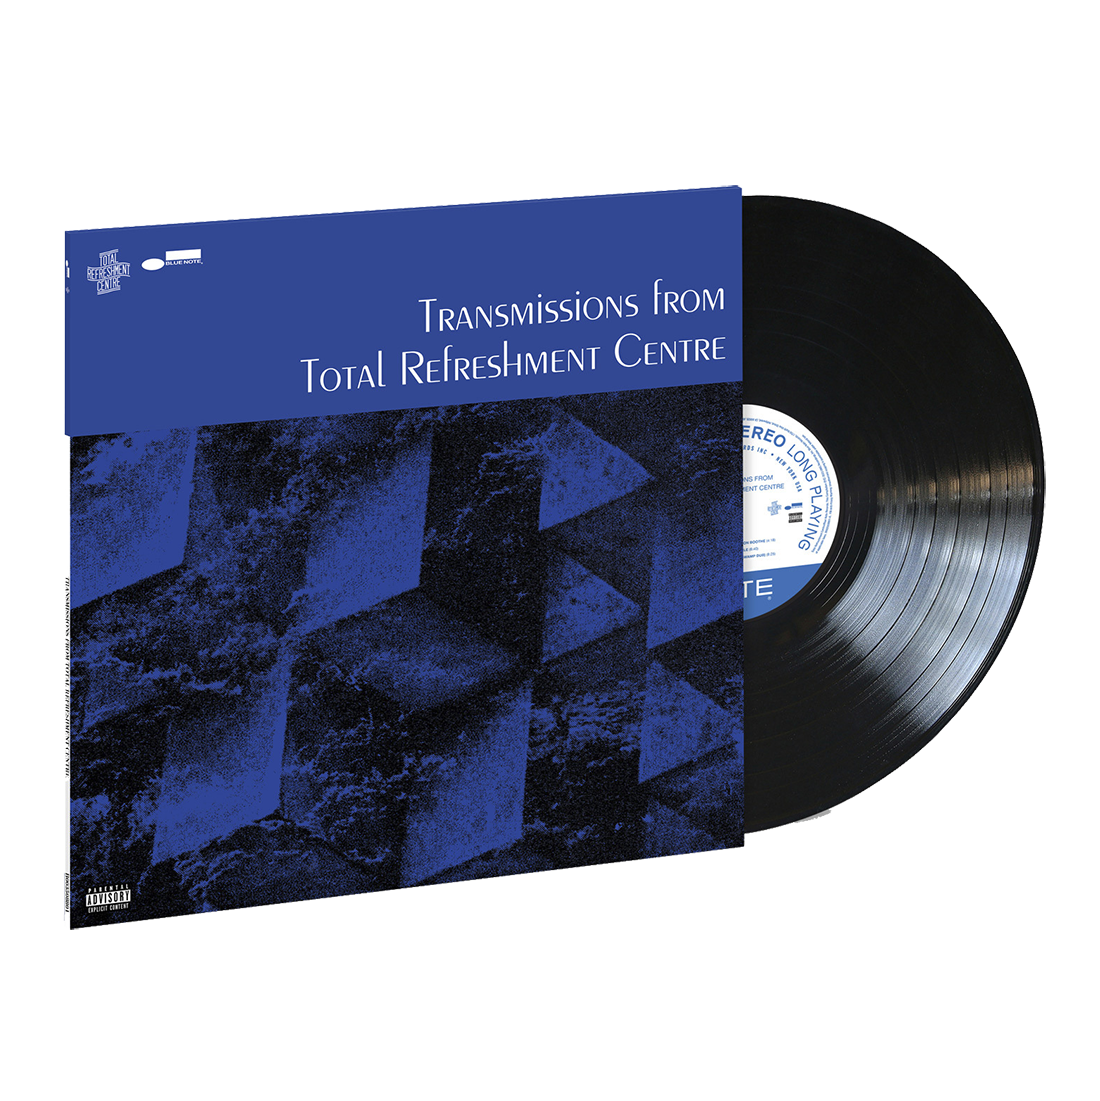 Transmissions from Total Refreshment Centre: Vinyl LP